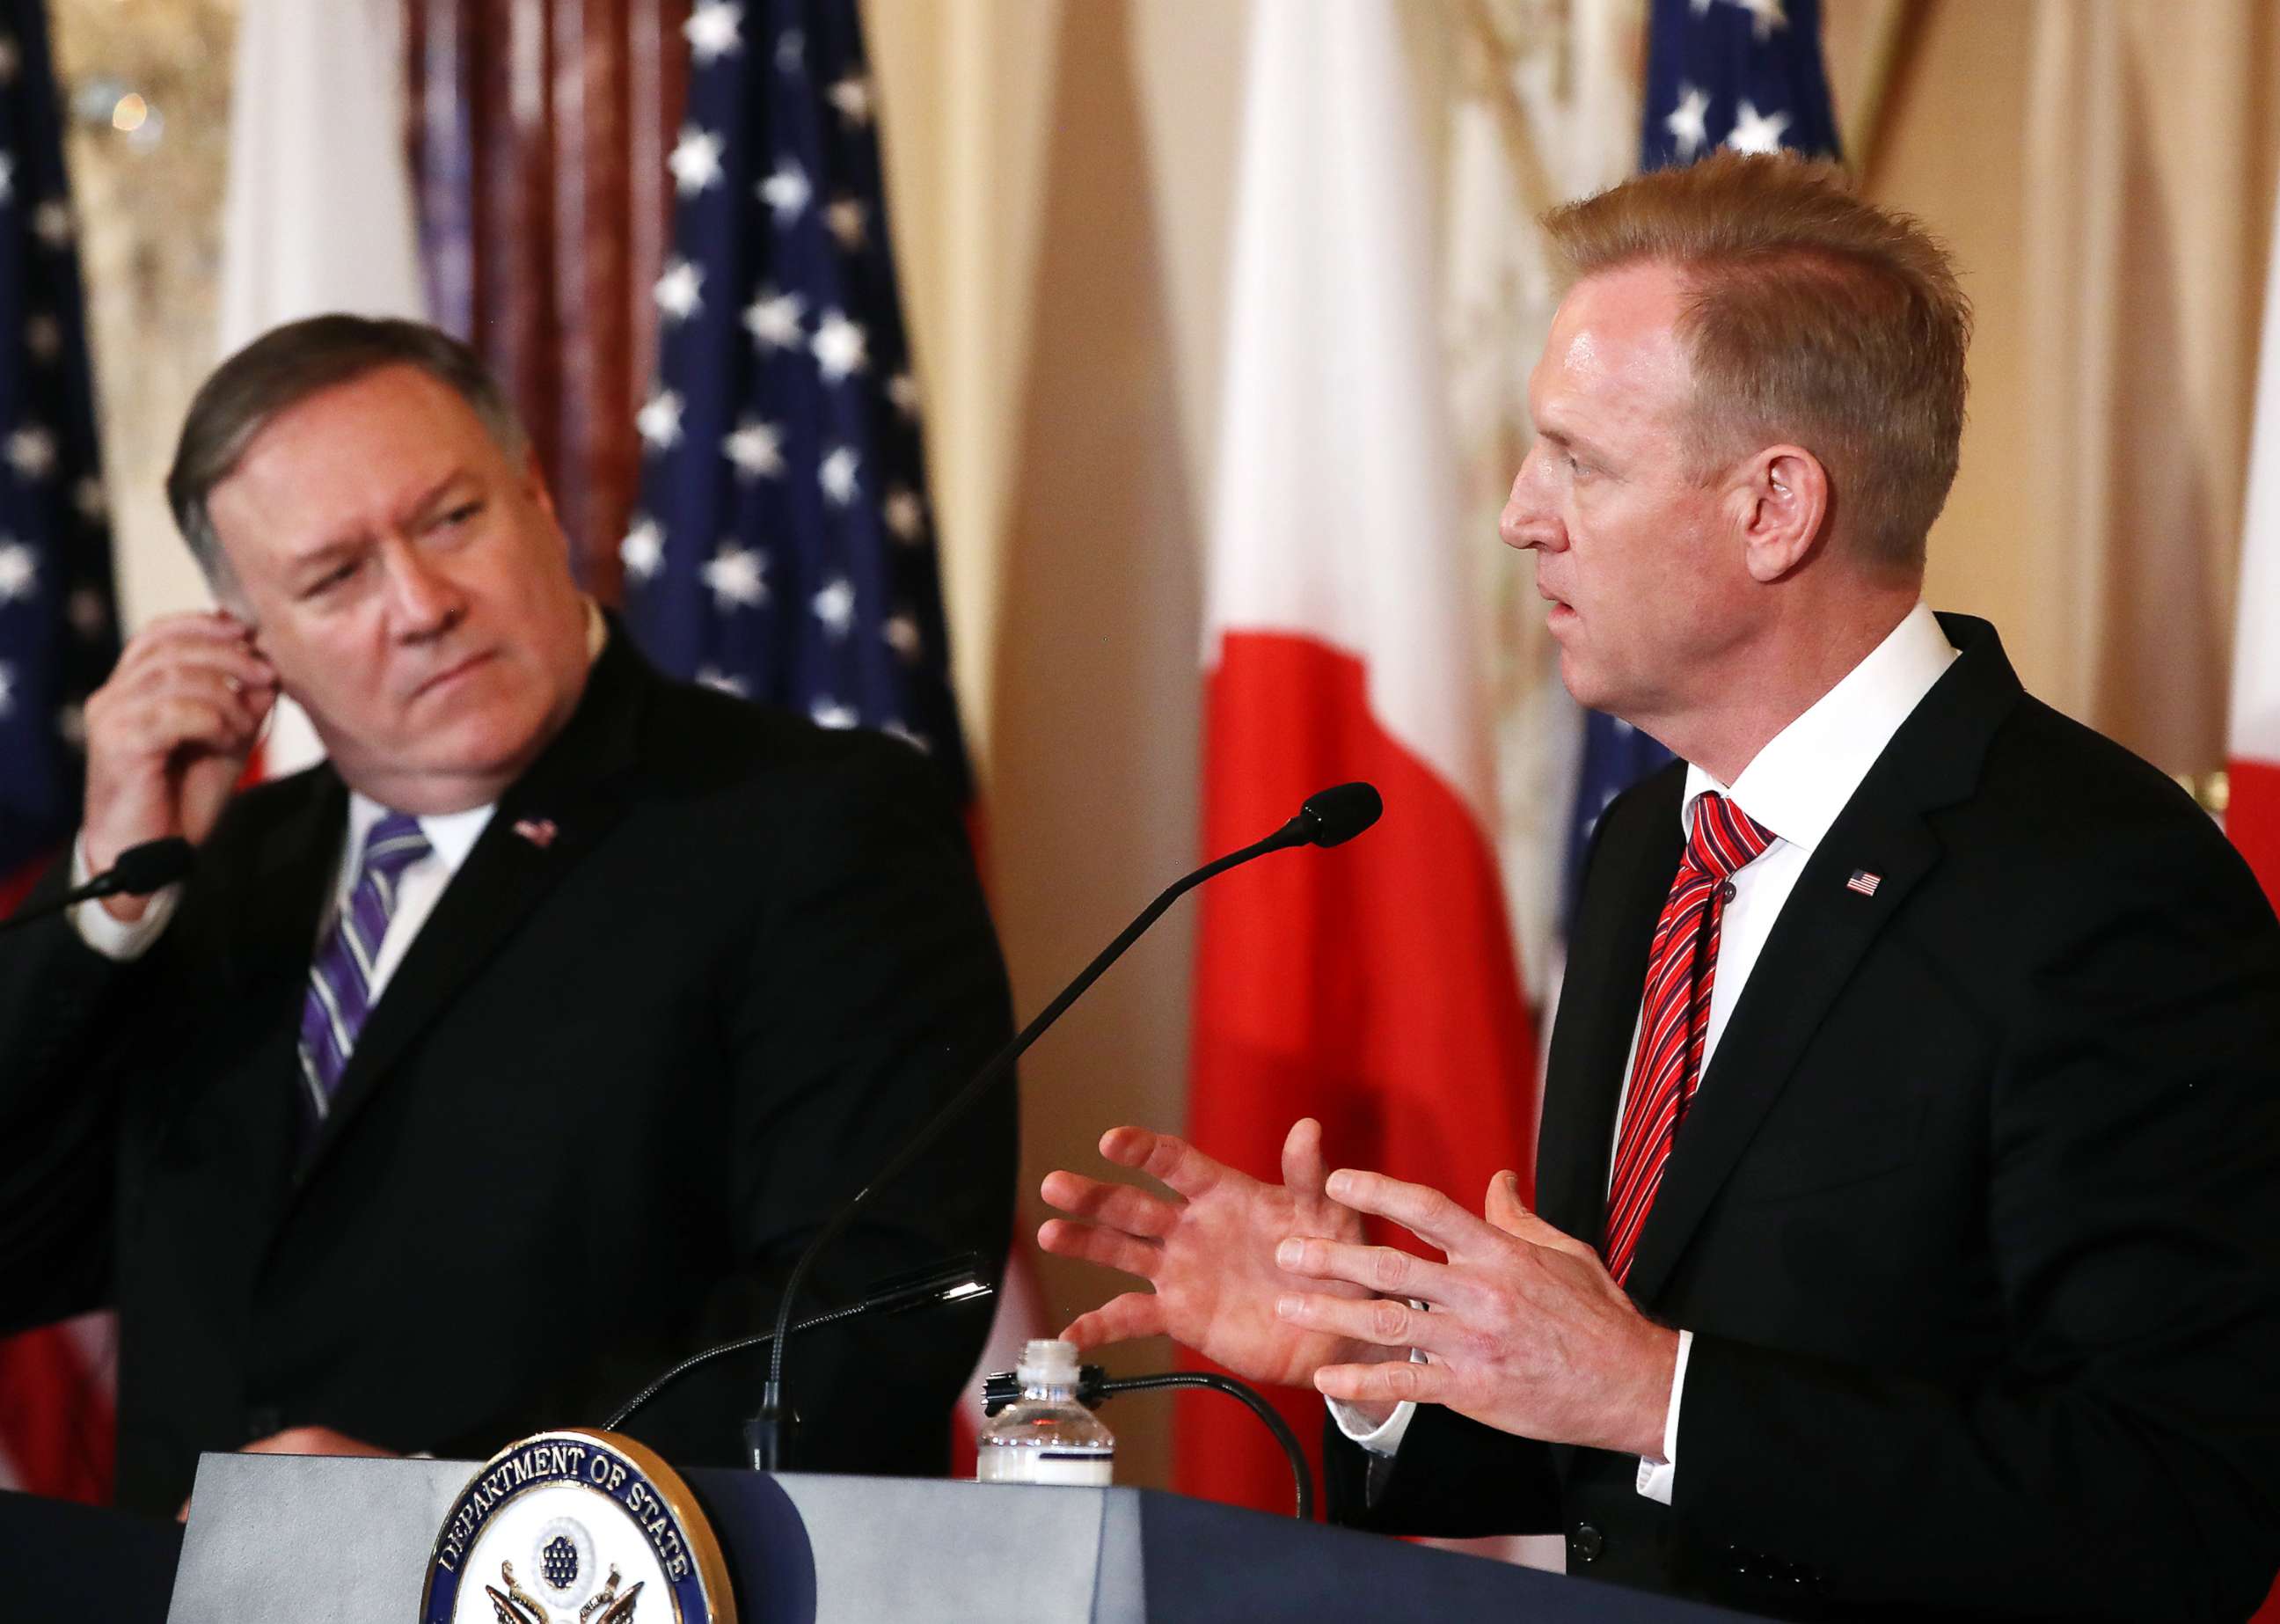 PHOTO: Secretary of State Mike Pompeo (left) and acting Defense Secretary Patrick Shanahan participate in a media availability at the Department of State on April 19, 2019, in Washington, D.C.